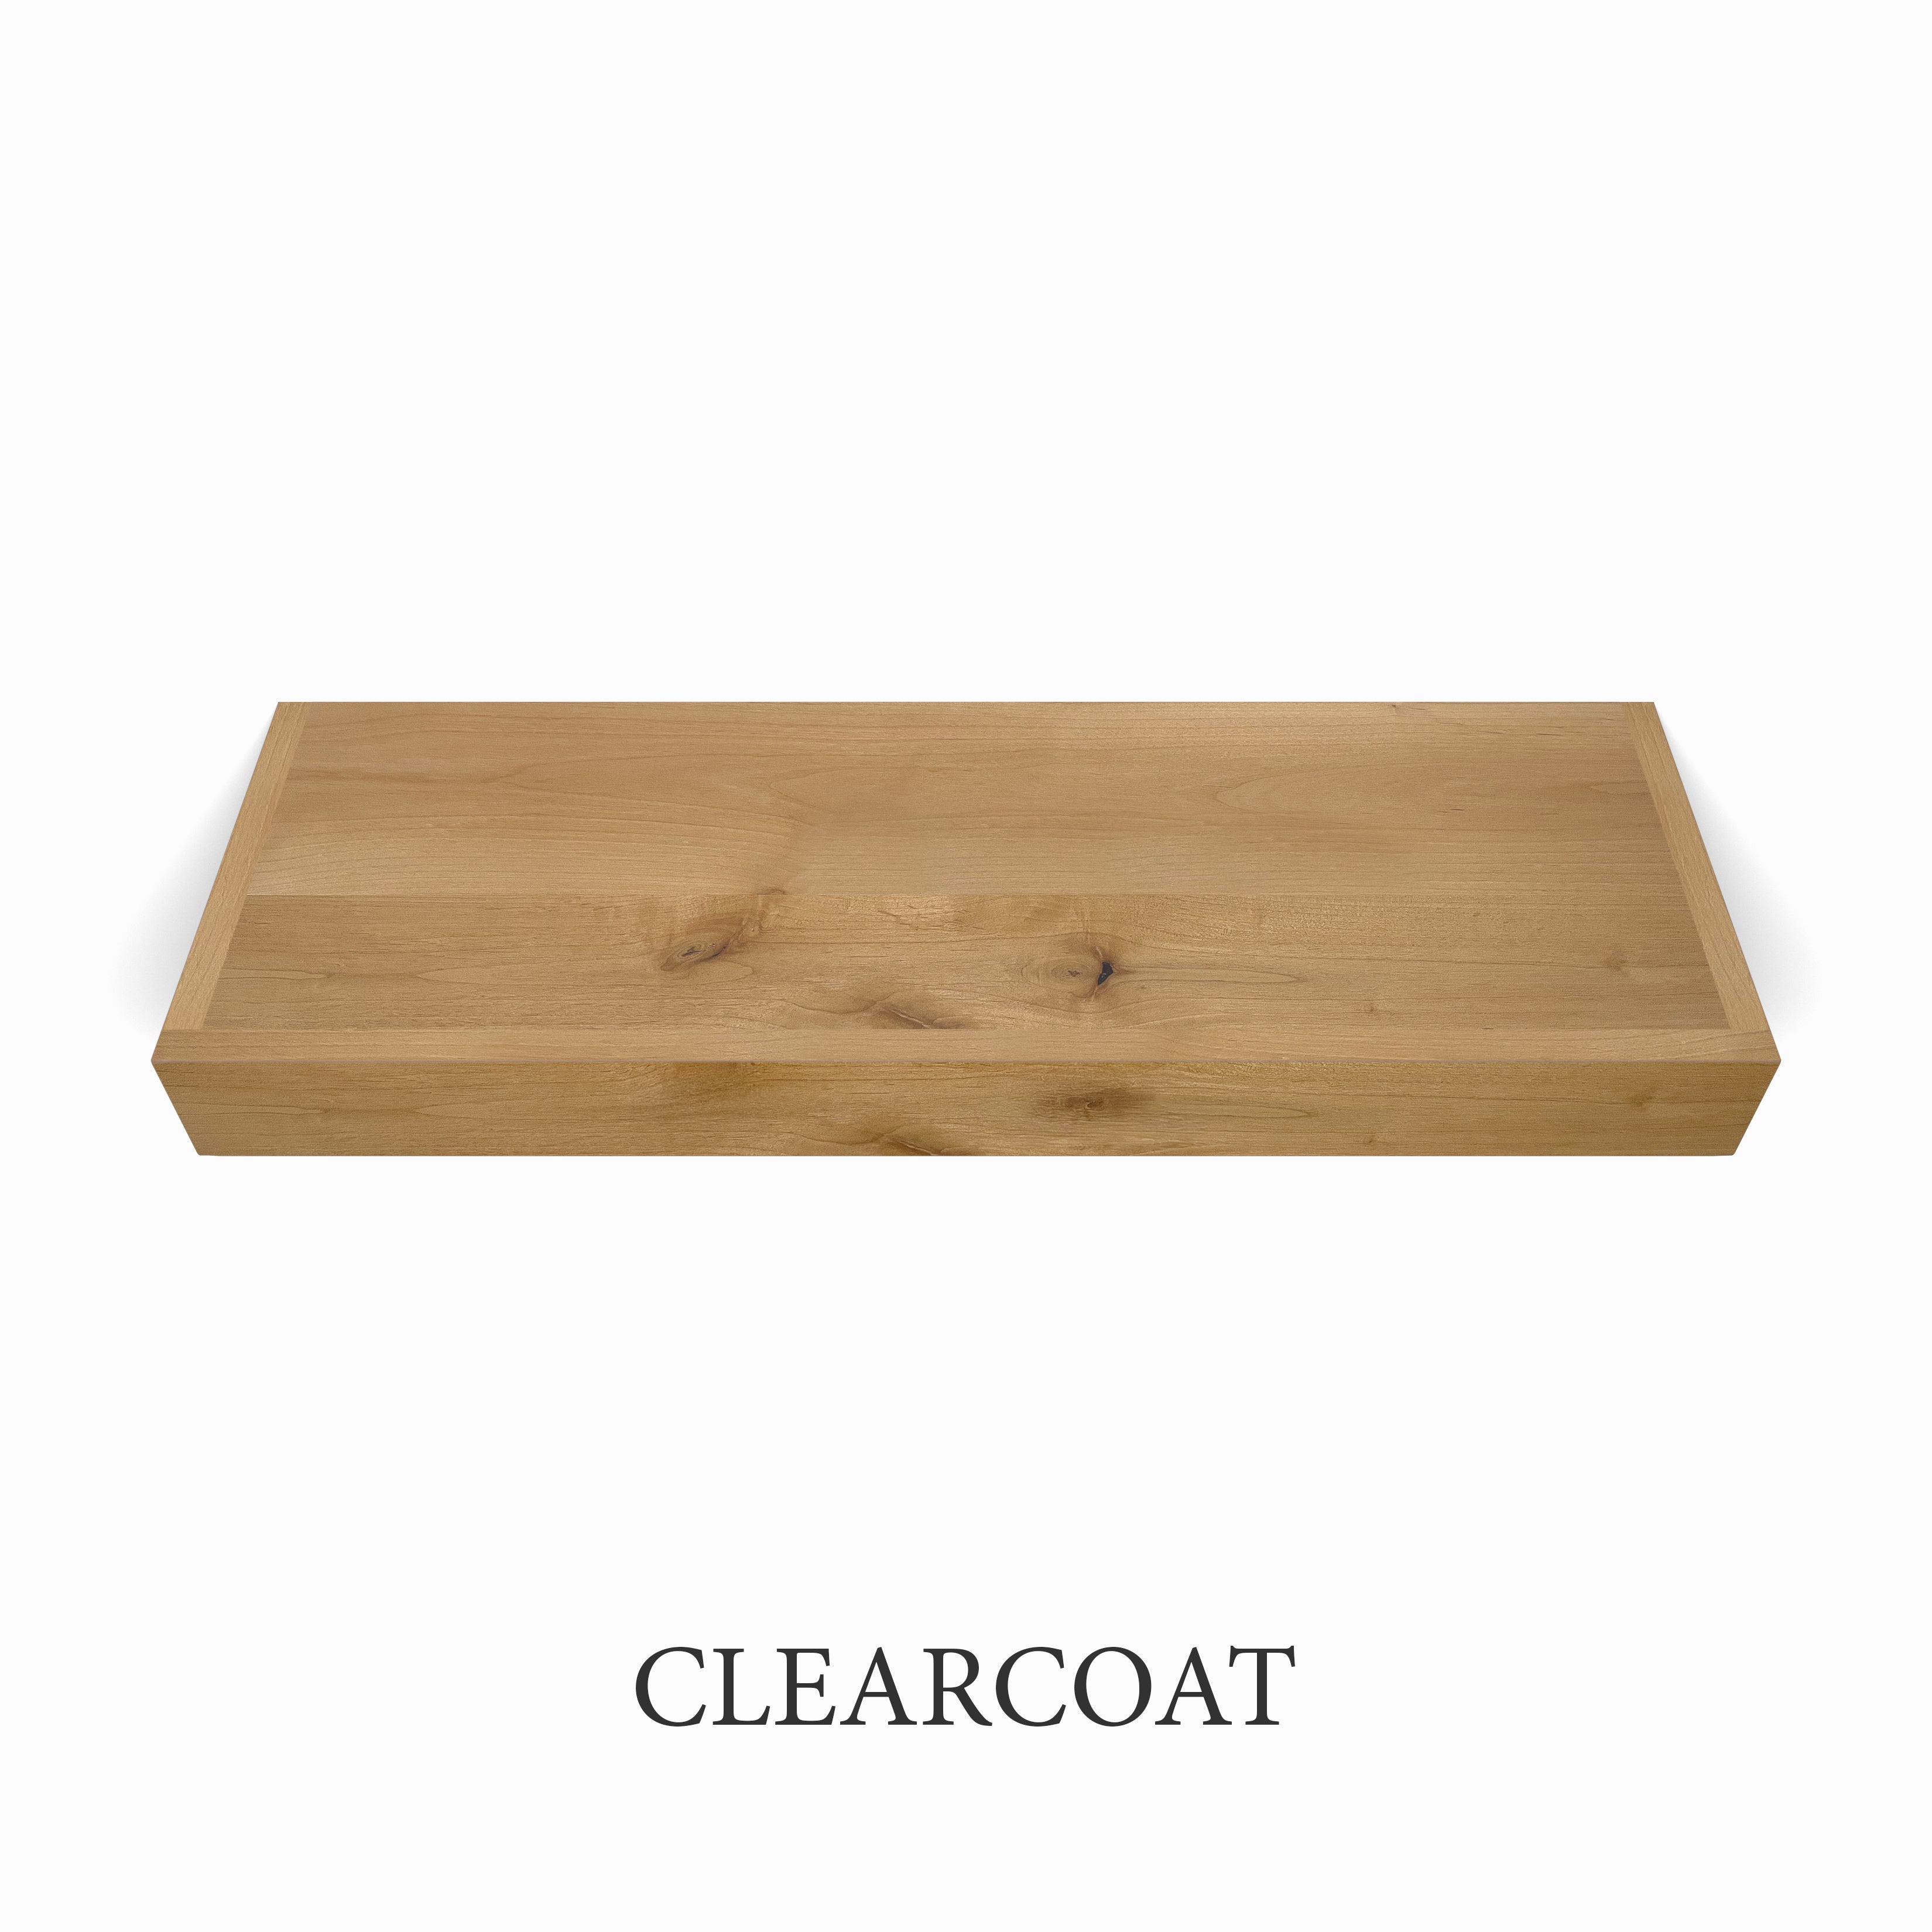 clearcoat Rustic Alder 3 Inch Thick LED Lighted Floating Shelf - Battery